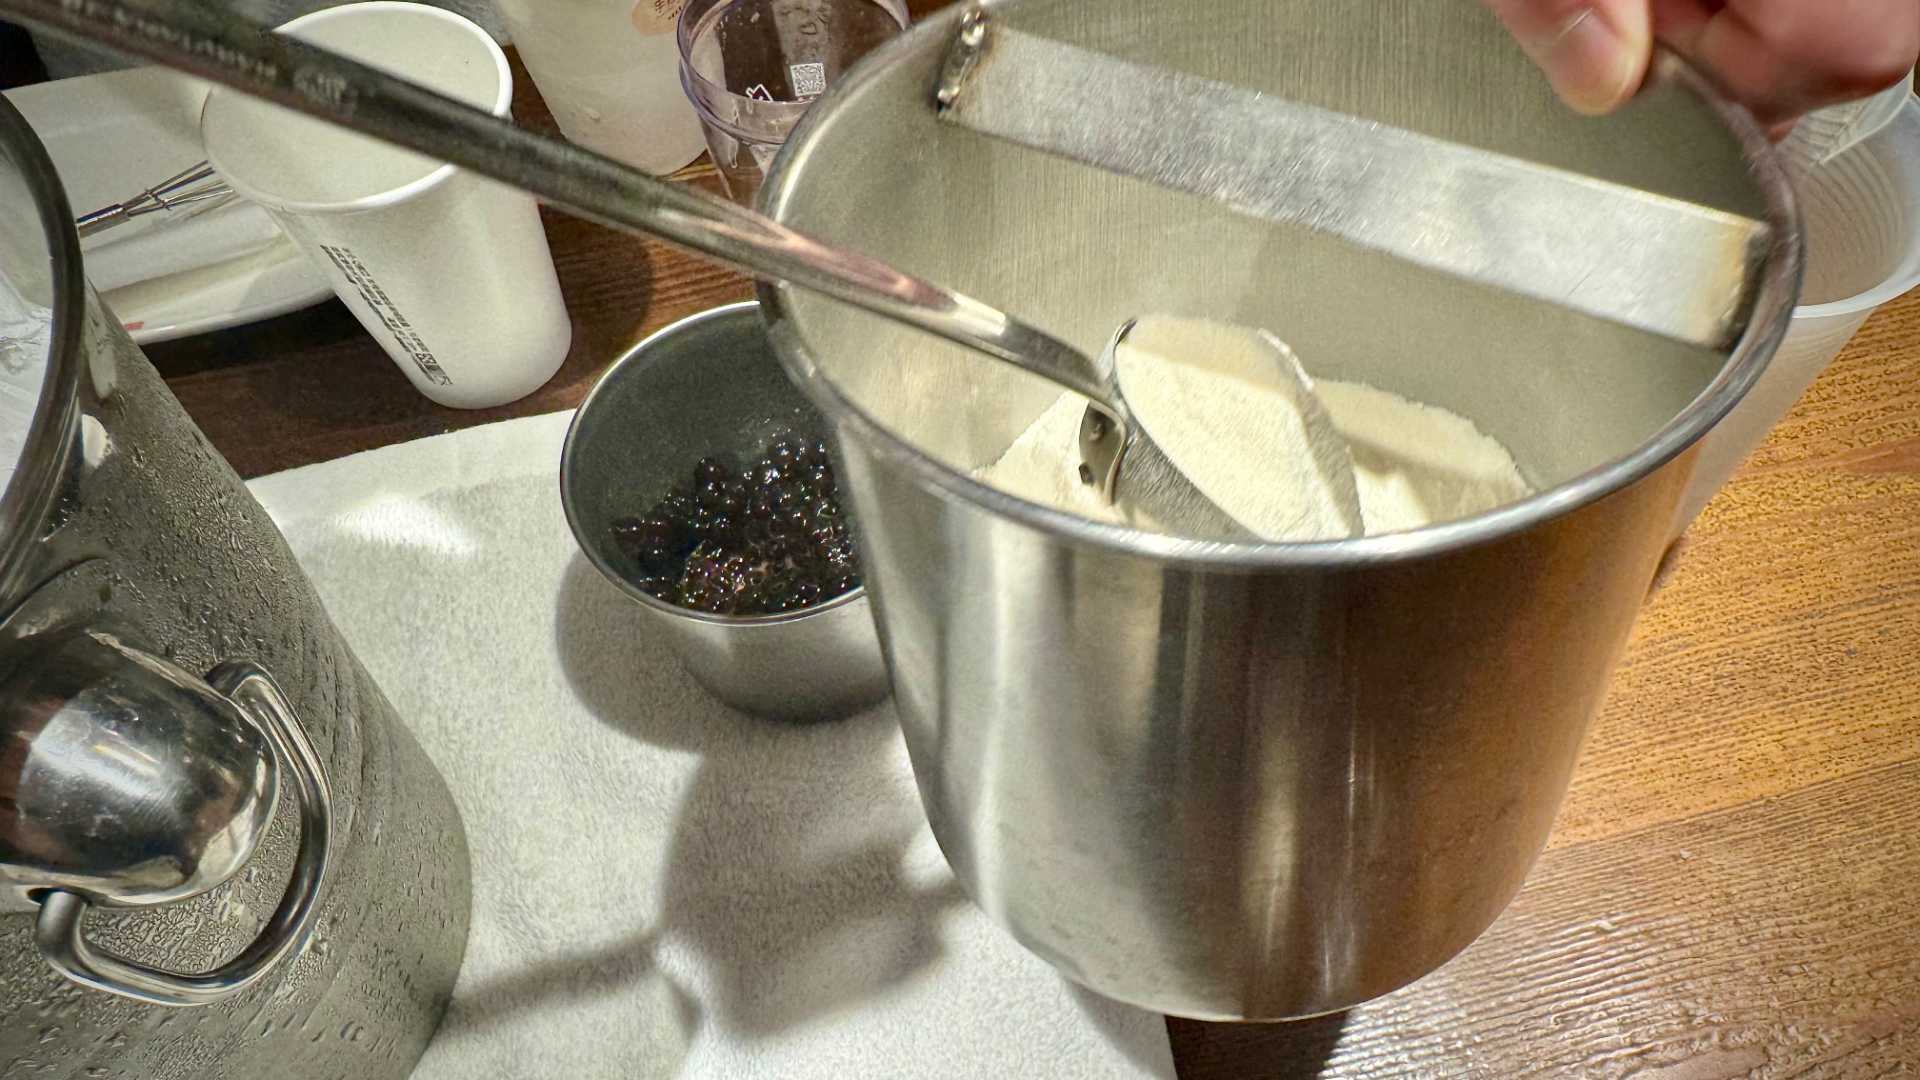 Creamer powder being scooped out of a metal container.